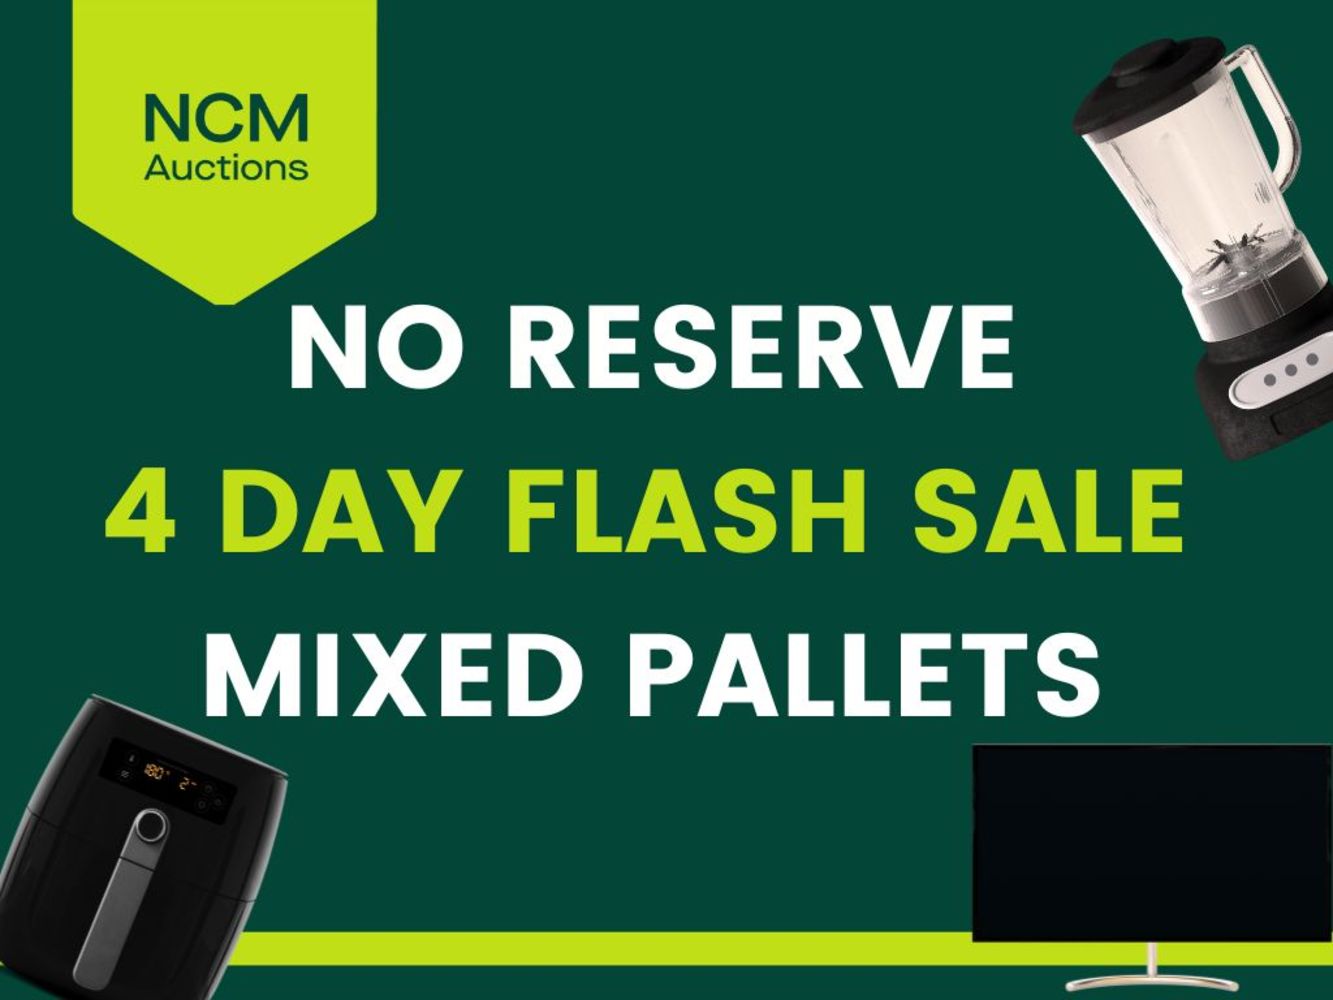 Mixed Trade Pallets Direct From Online Retailer *NO RESERVE* Branded Products Up To 90% Off RRP